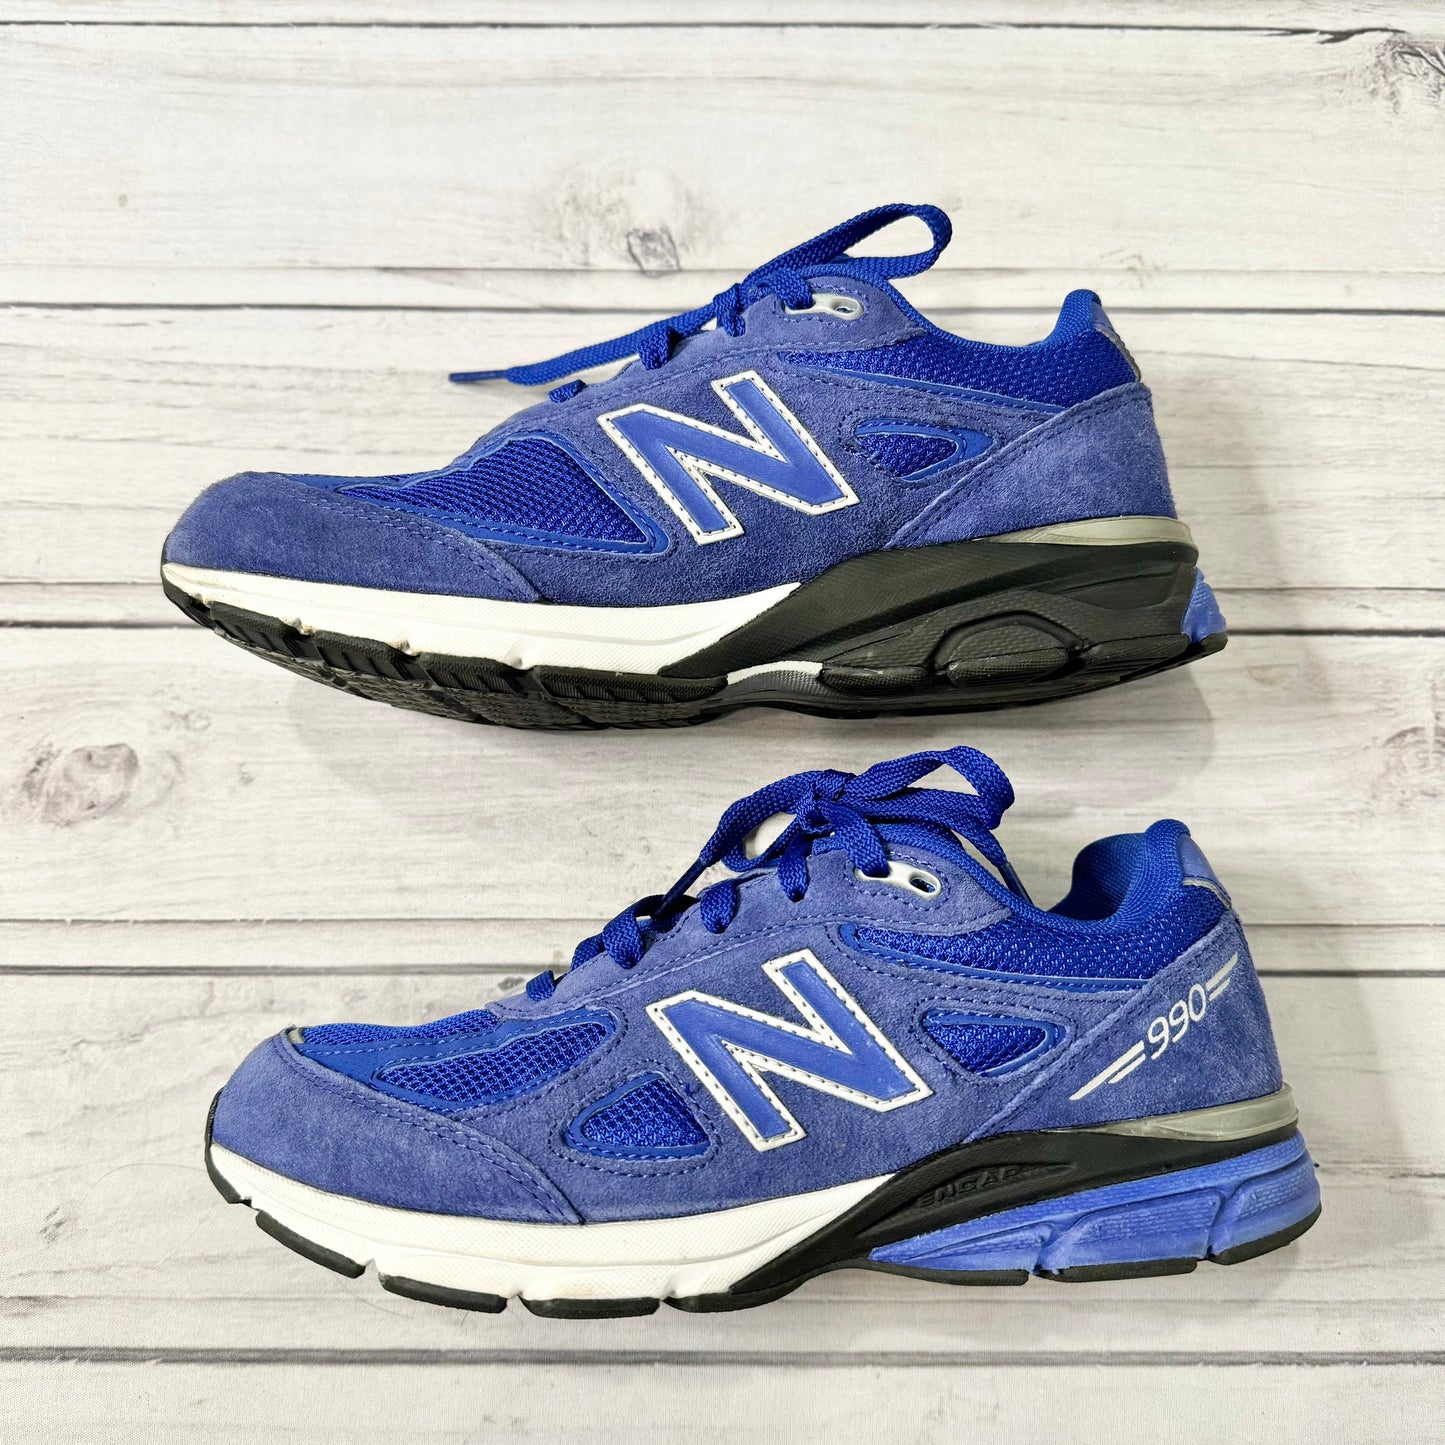 Shoes Sneakers By New Balance  Size: 6.5